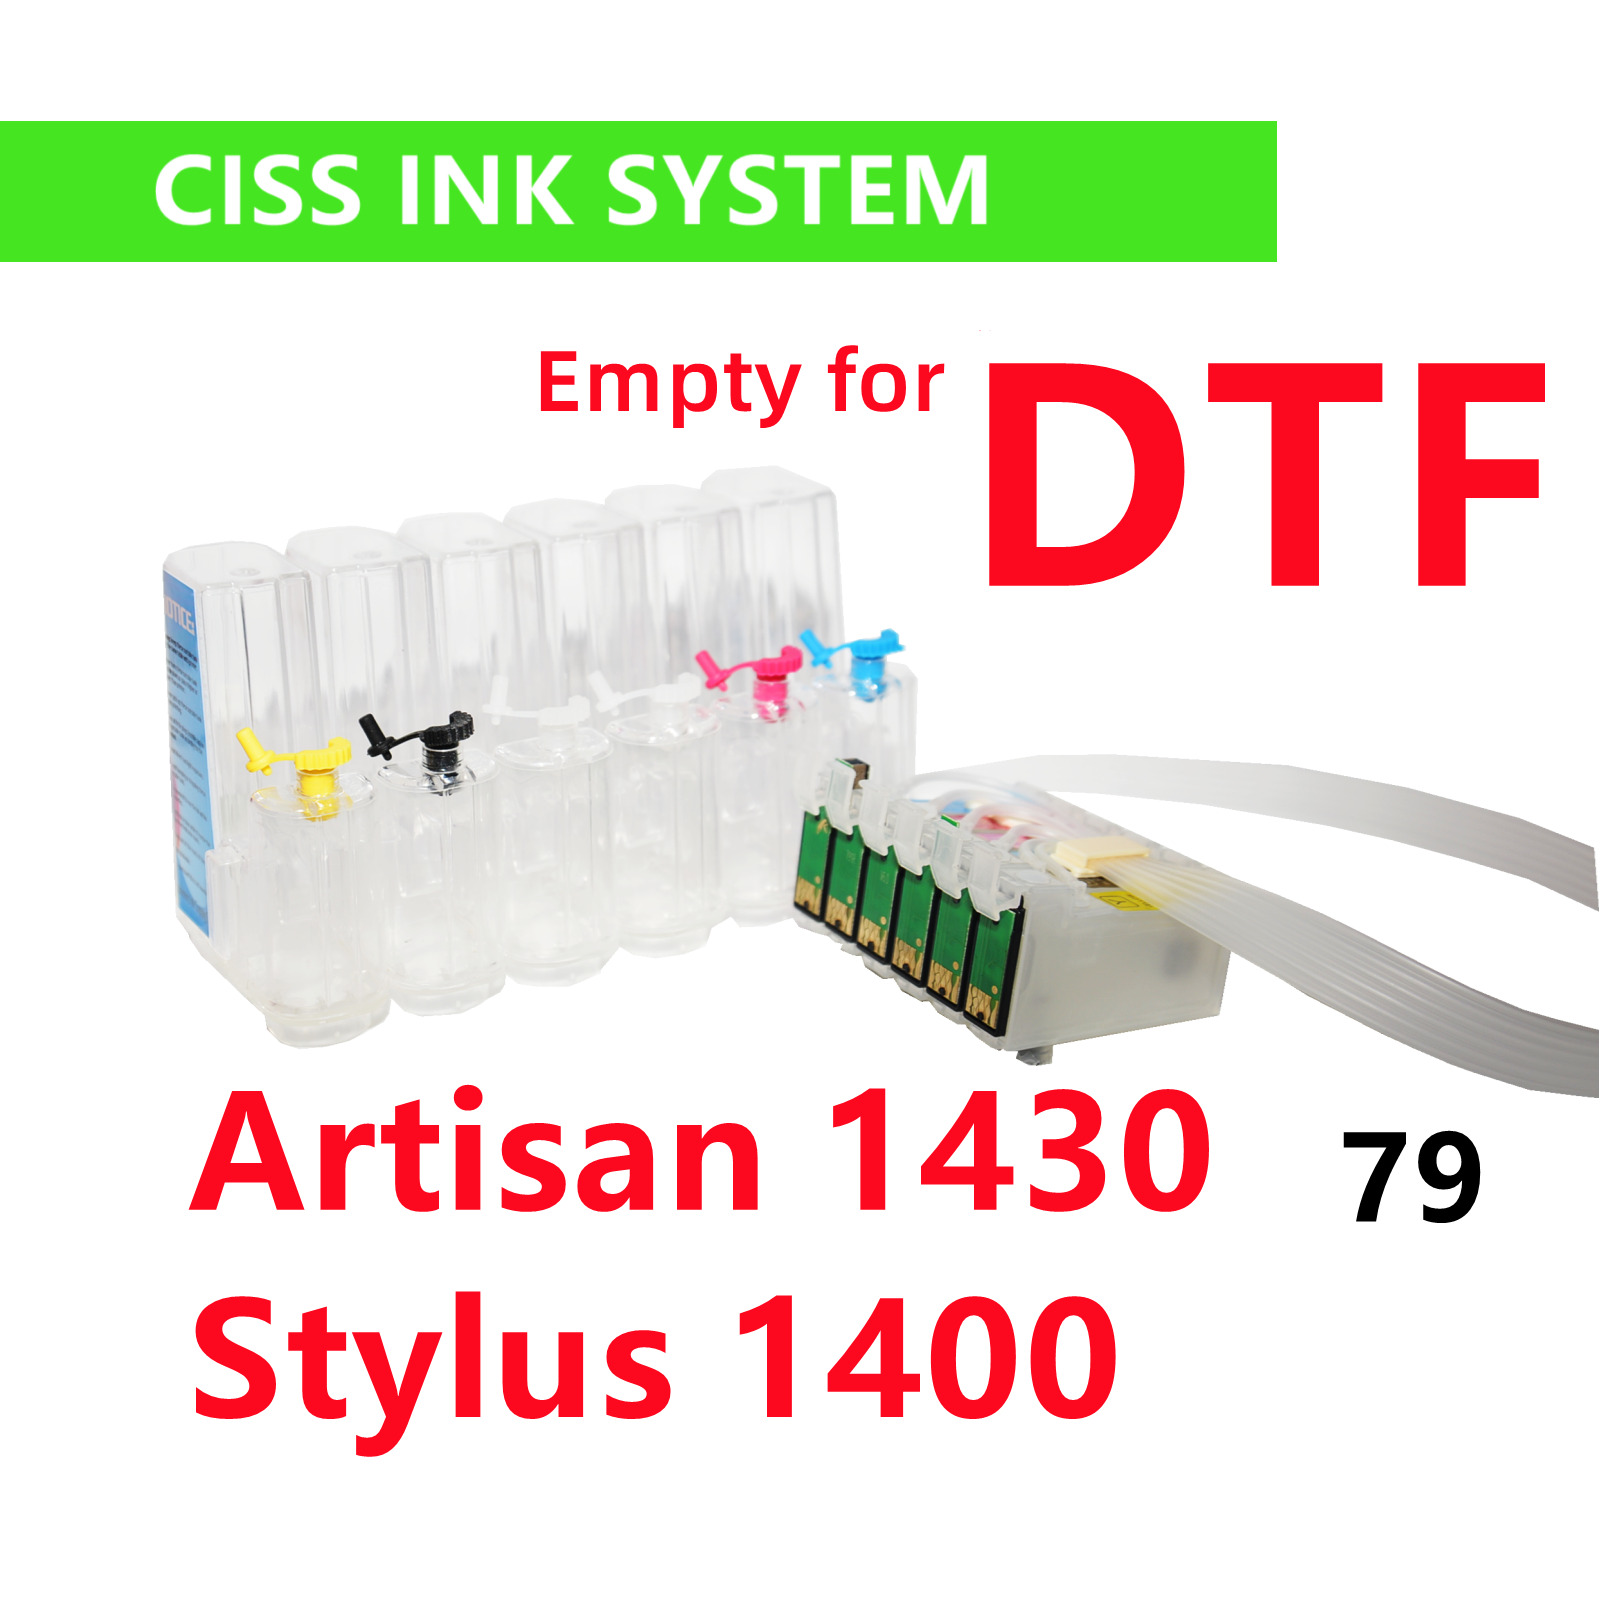 Refillable Empty Cis ciss ink system for Stylus 1400 Artisan 1430 DTF printing